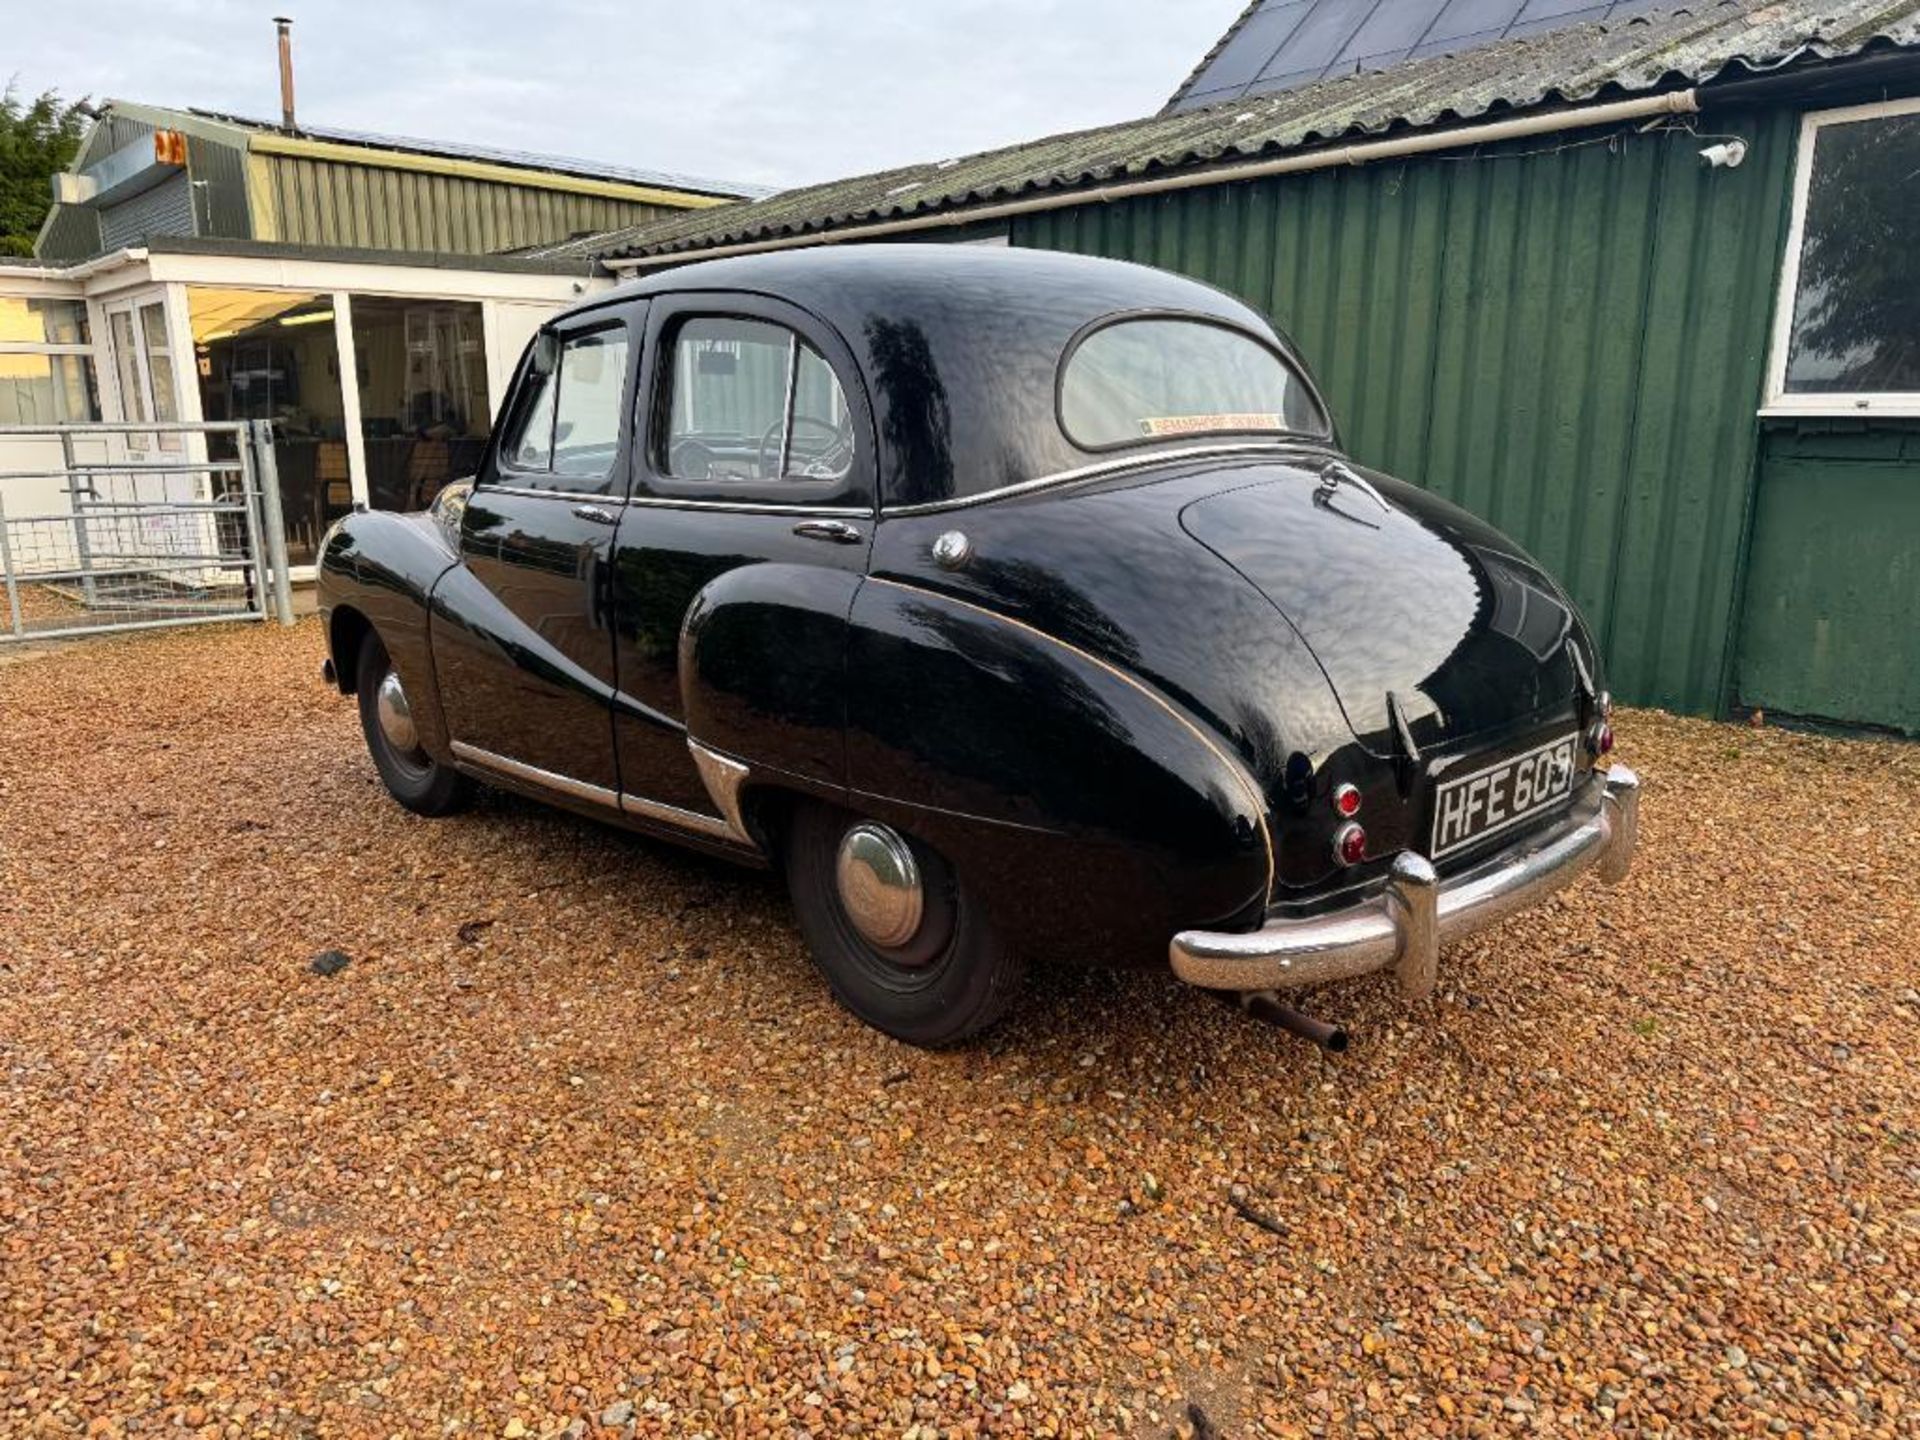 1954 Austin A40 Somerset black saloon car with 1200cc petrol engine, red leather interior and spare - Image 5 of 24